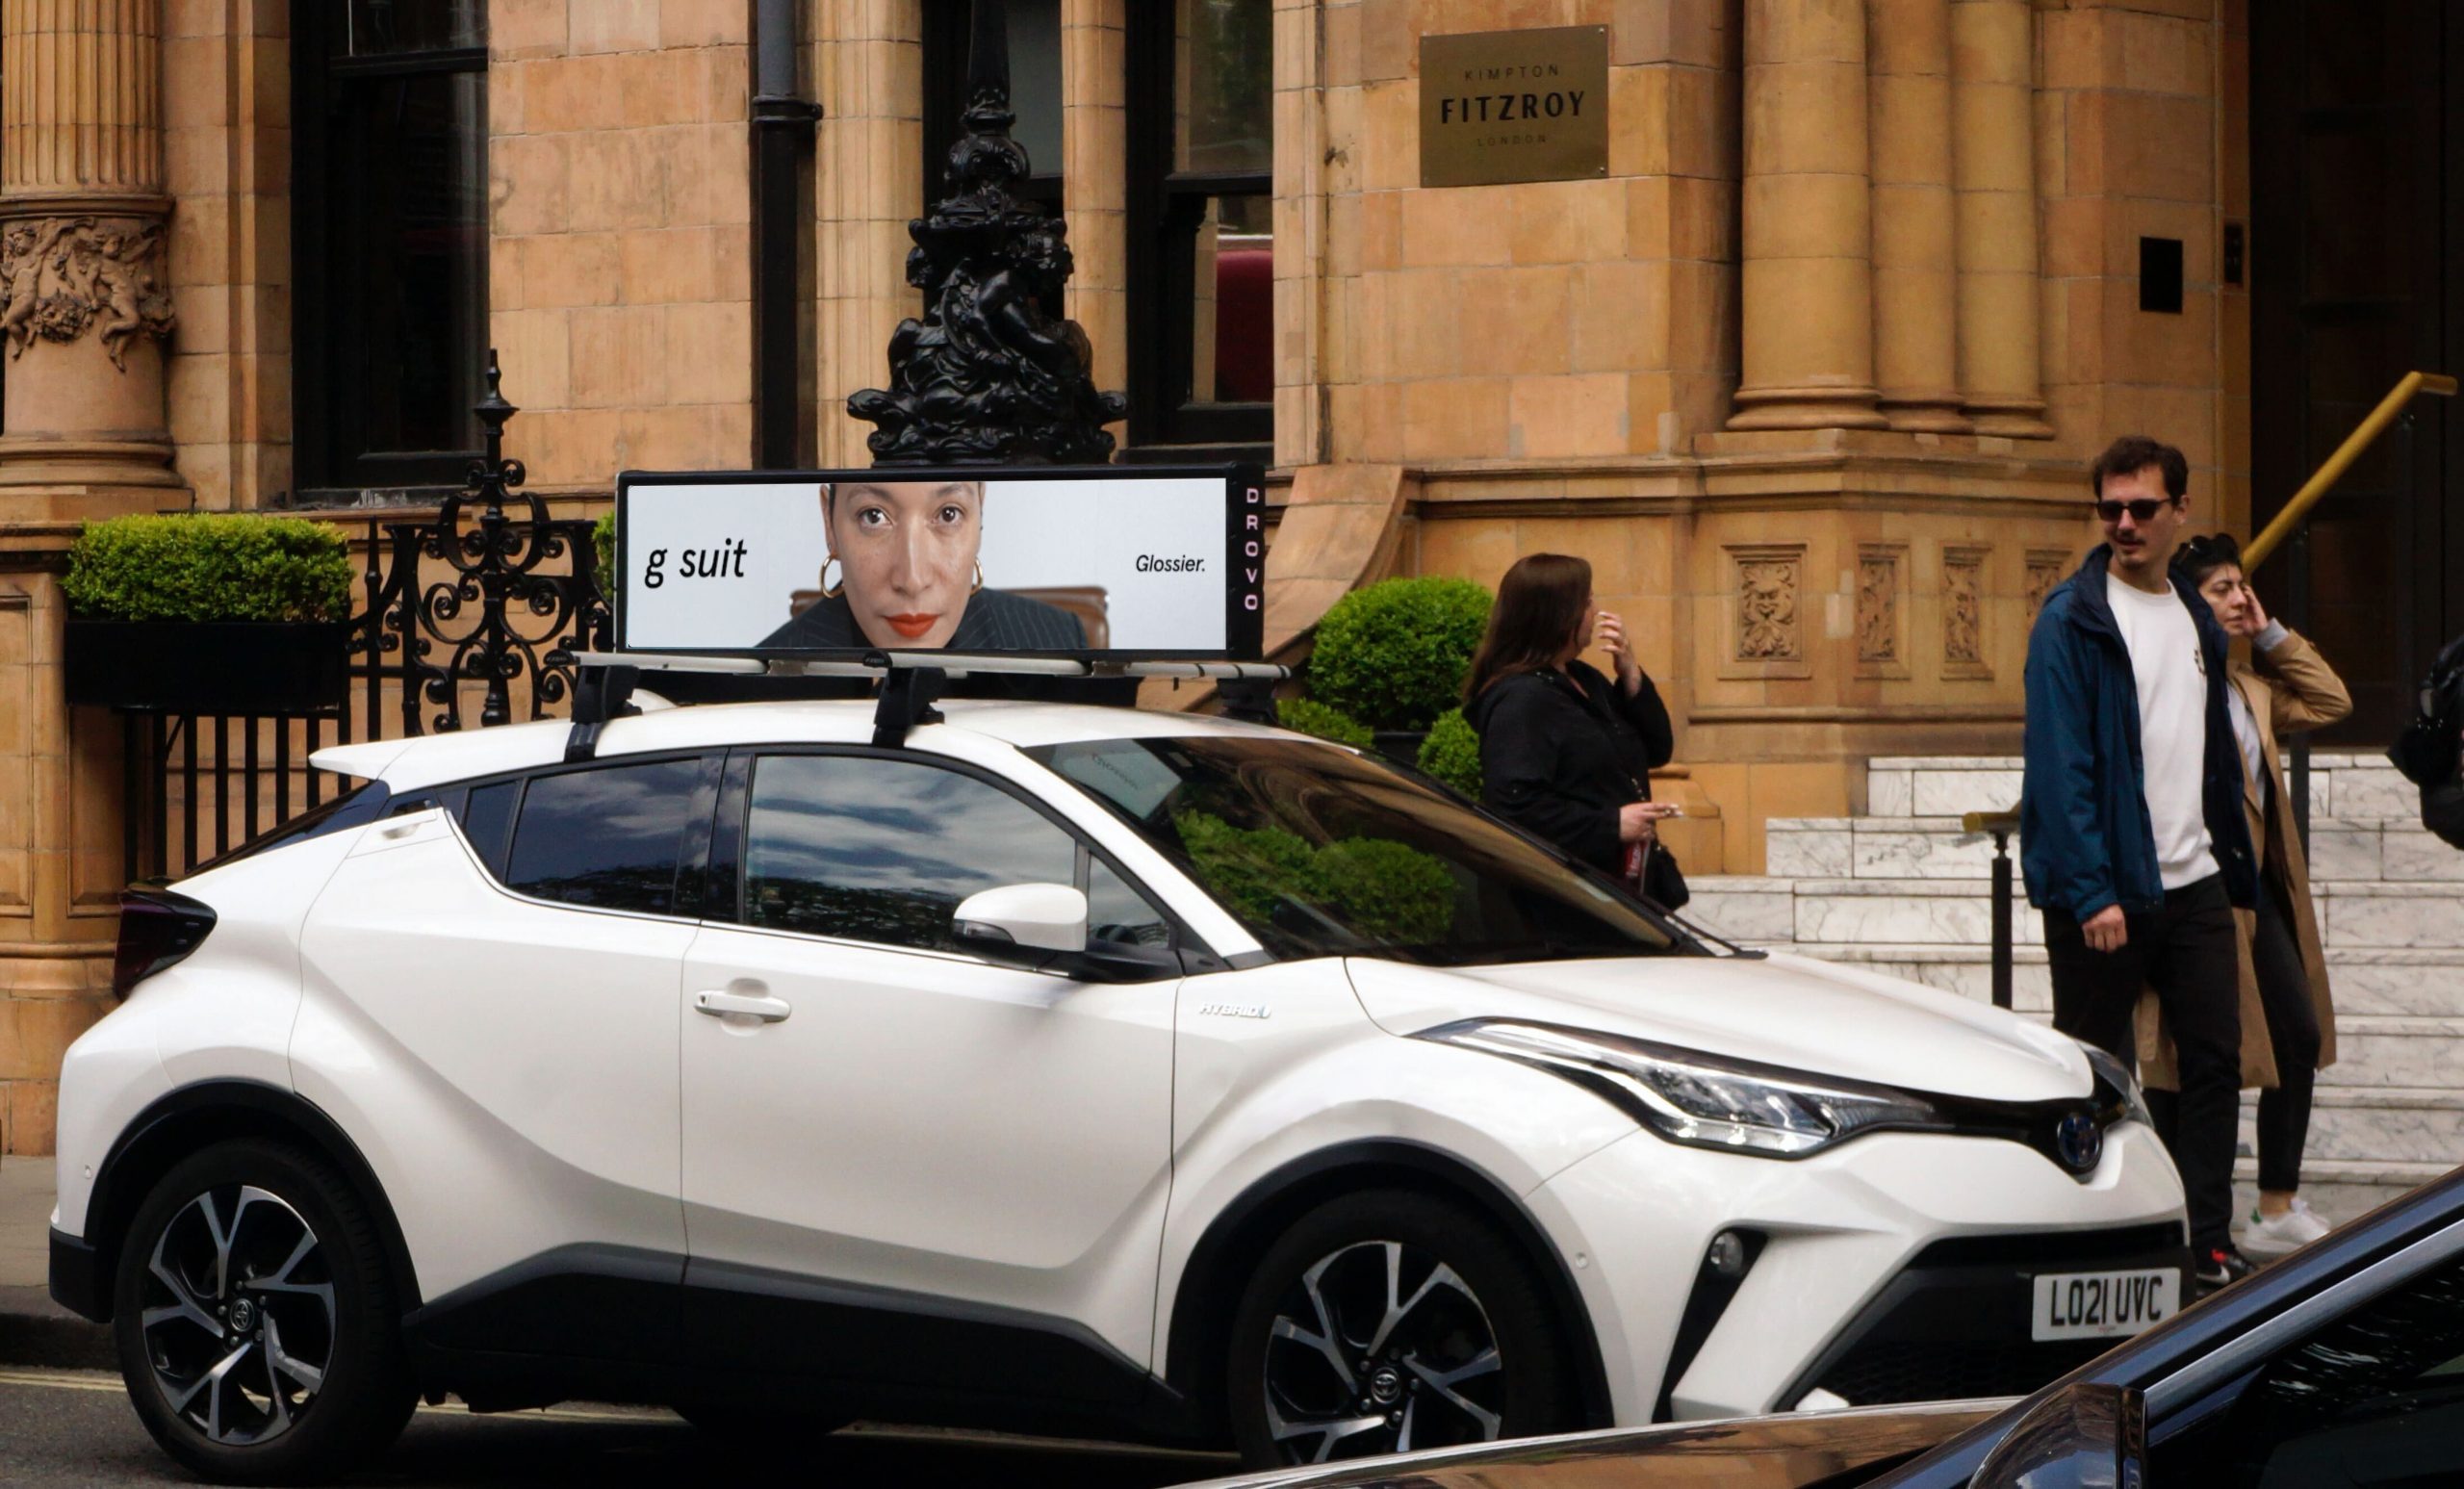 “On-vehicle Drovo screen campaign in London